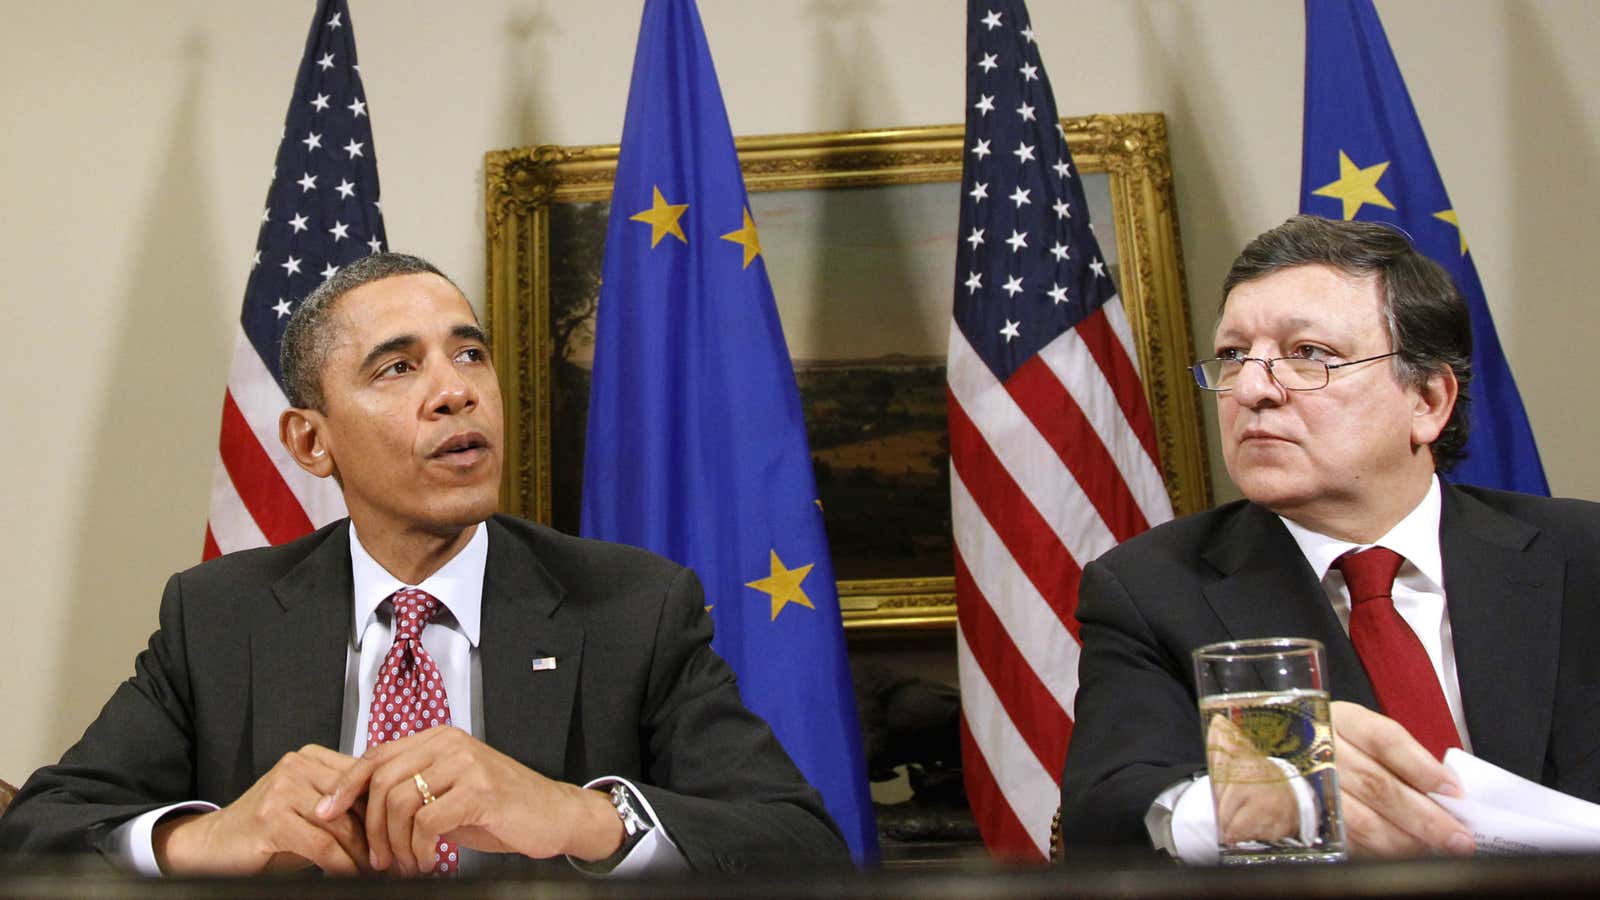 Barack Obama needs to be fully committed to an US-EU free-trade agreement, which will be a tough deal to make.